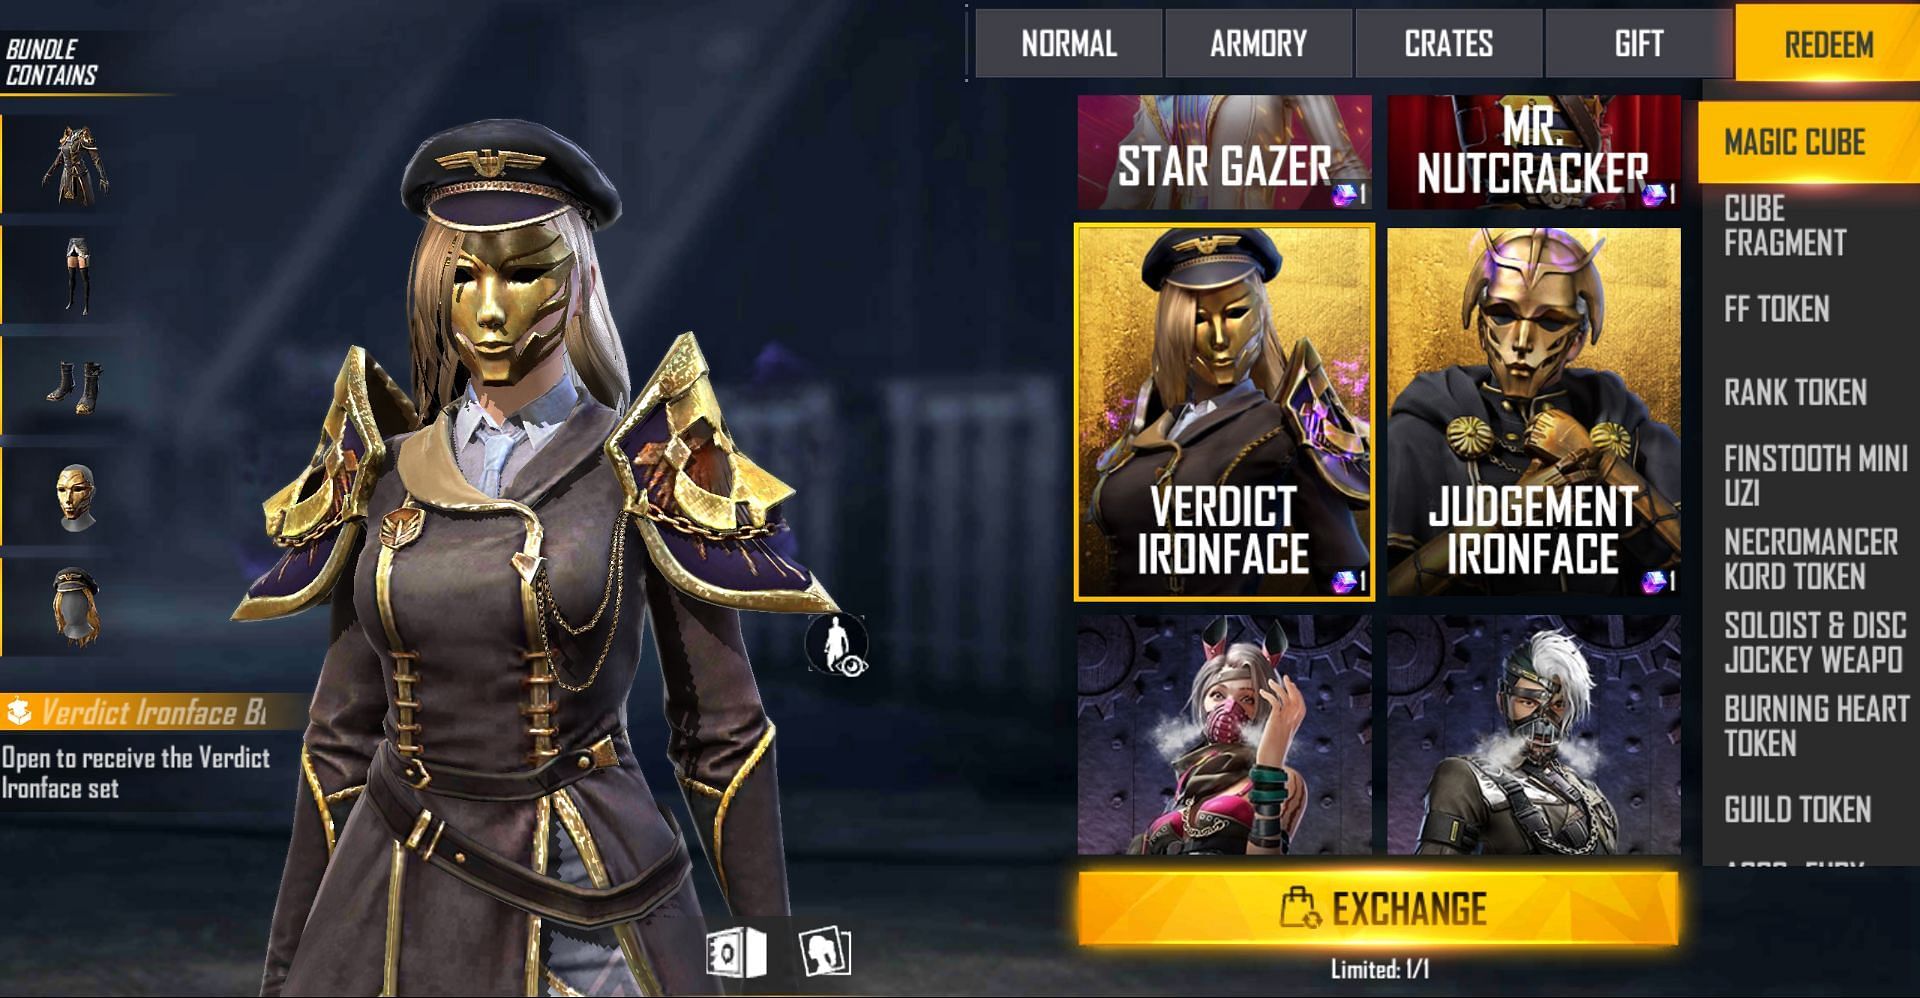 Verdict Ironface Bundle was first available in May 2021 (Image via Free Fire)